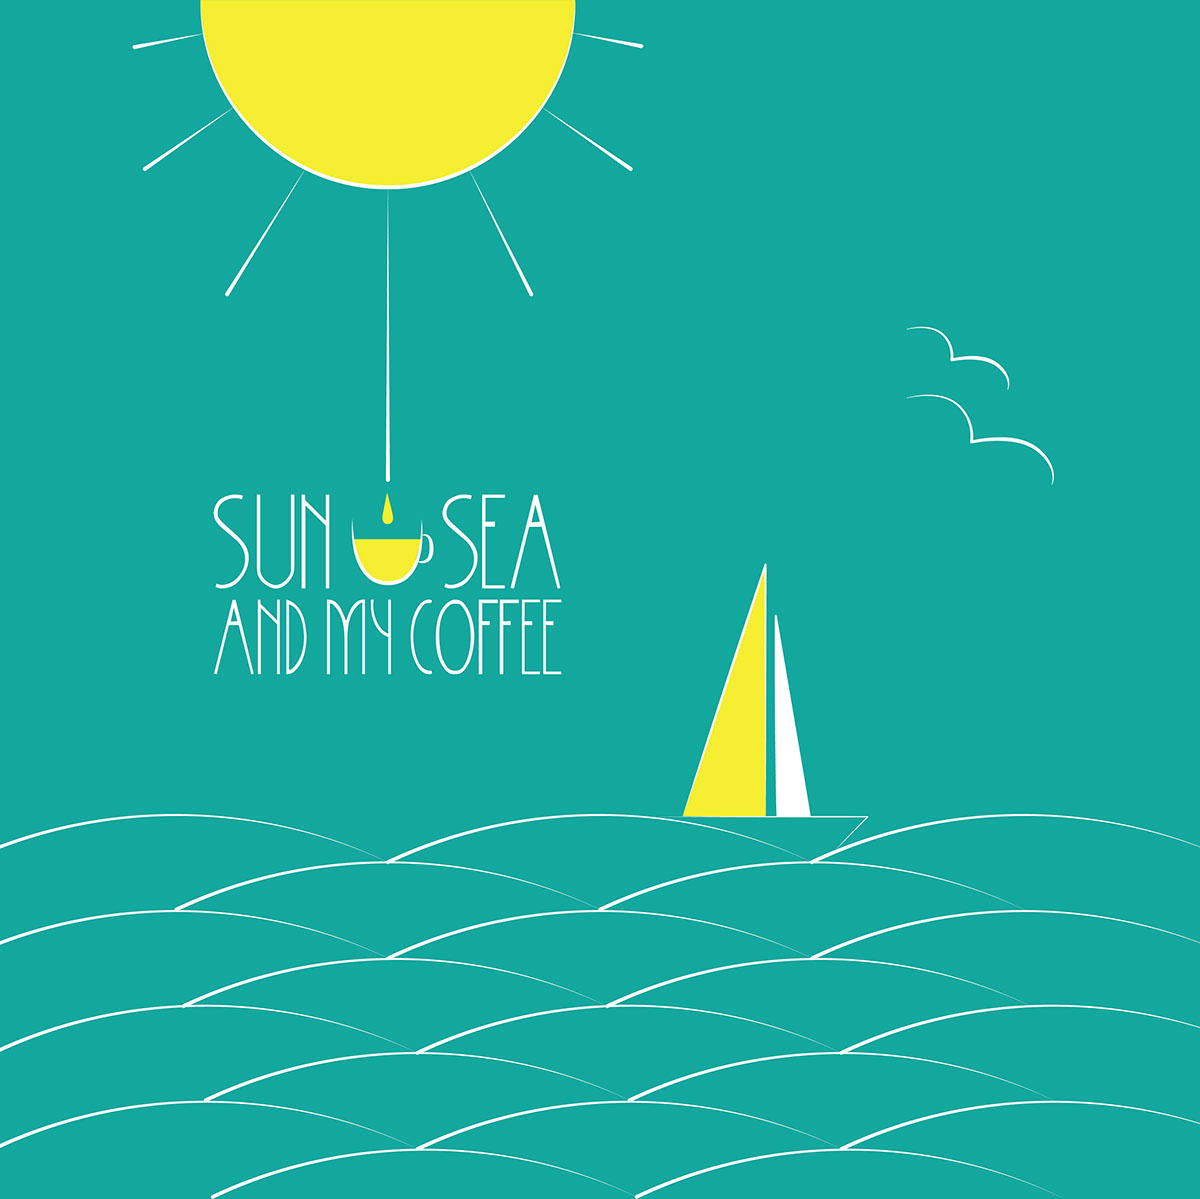 Sun Sea and my coffee rendition image